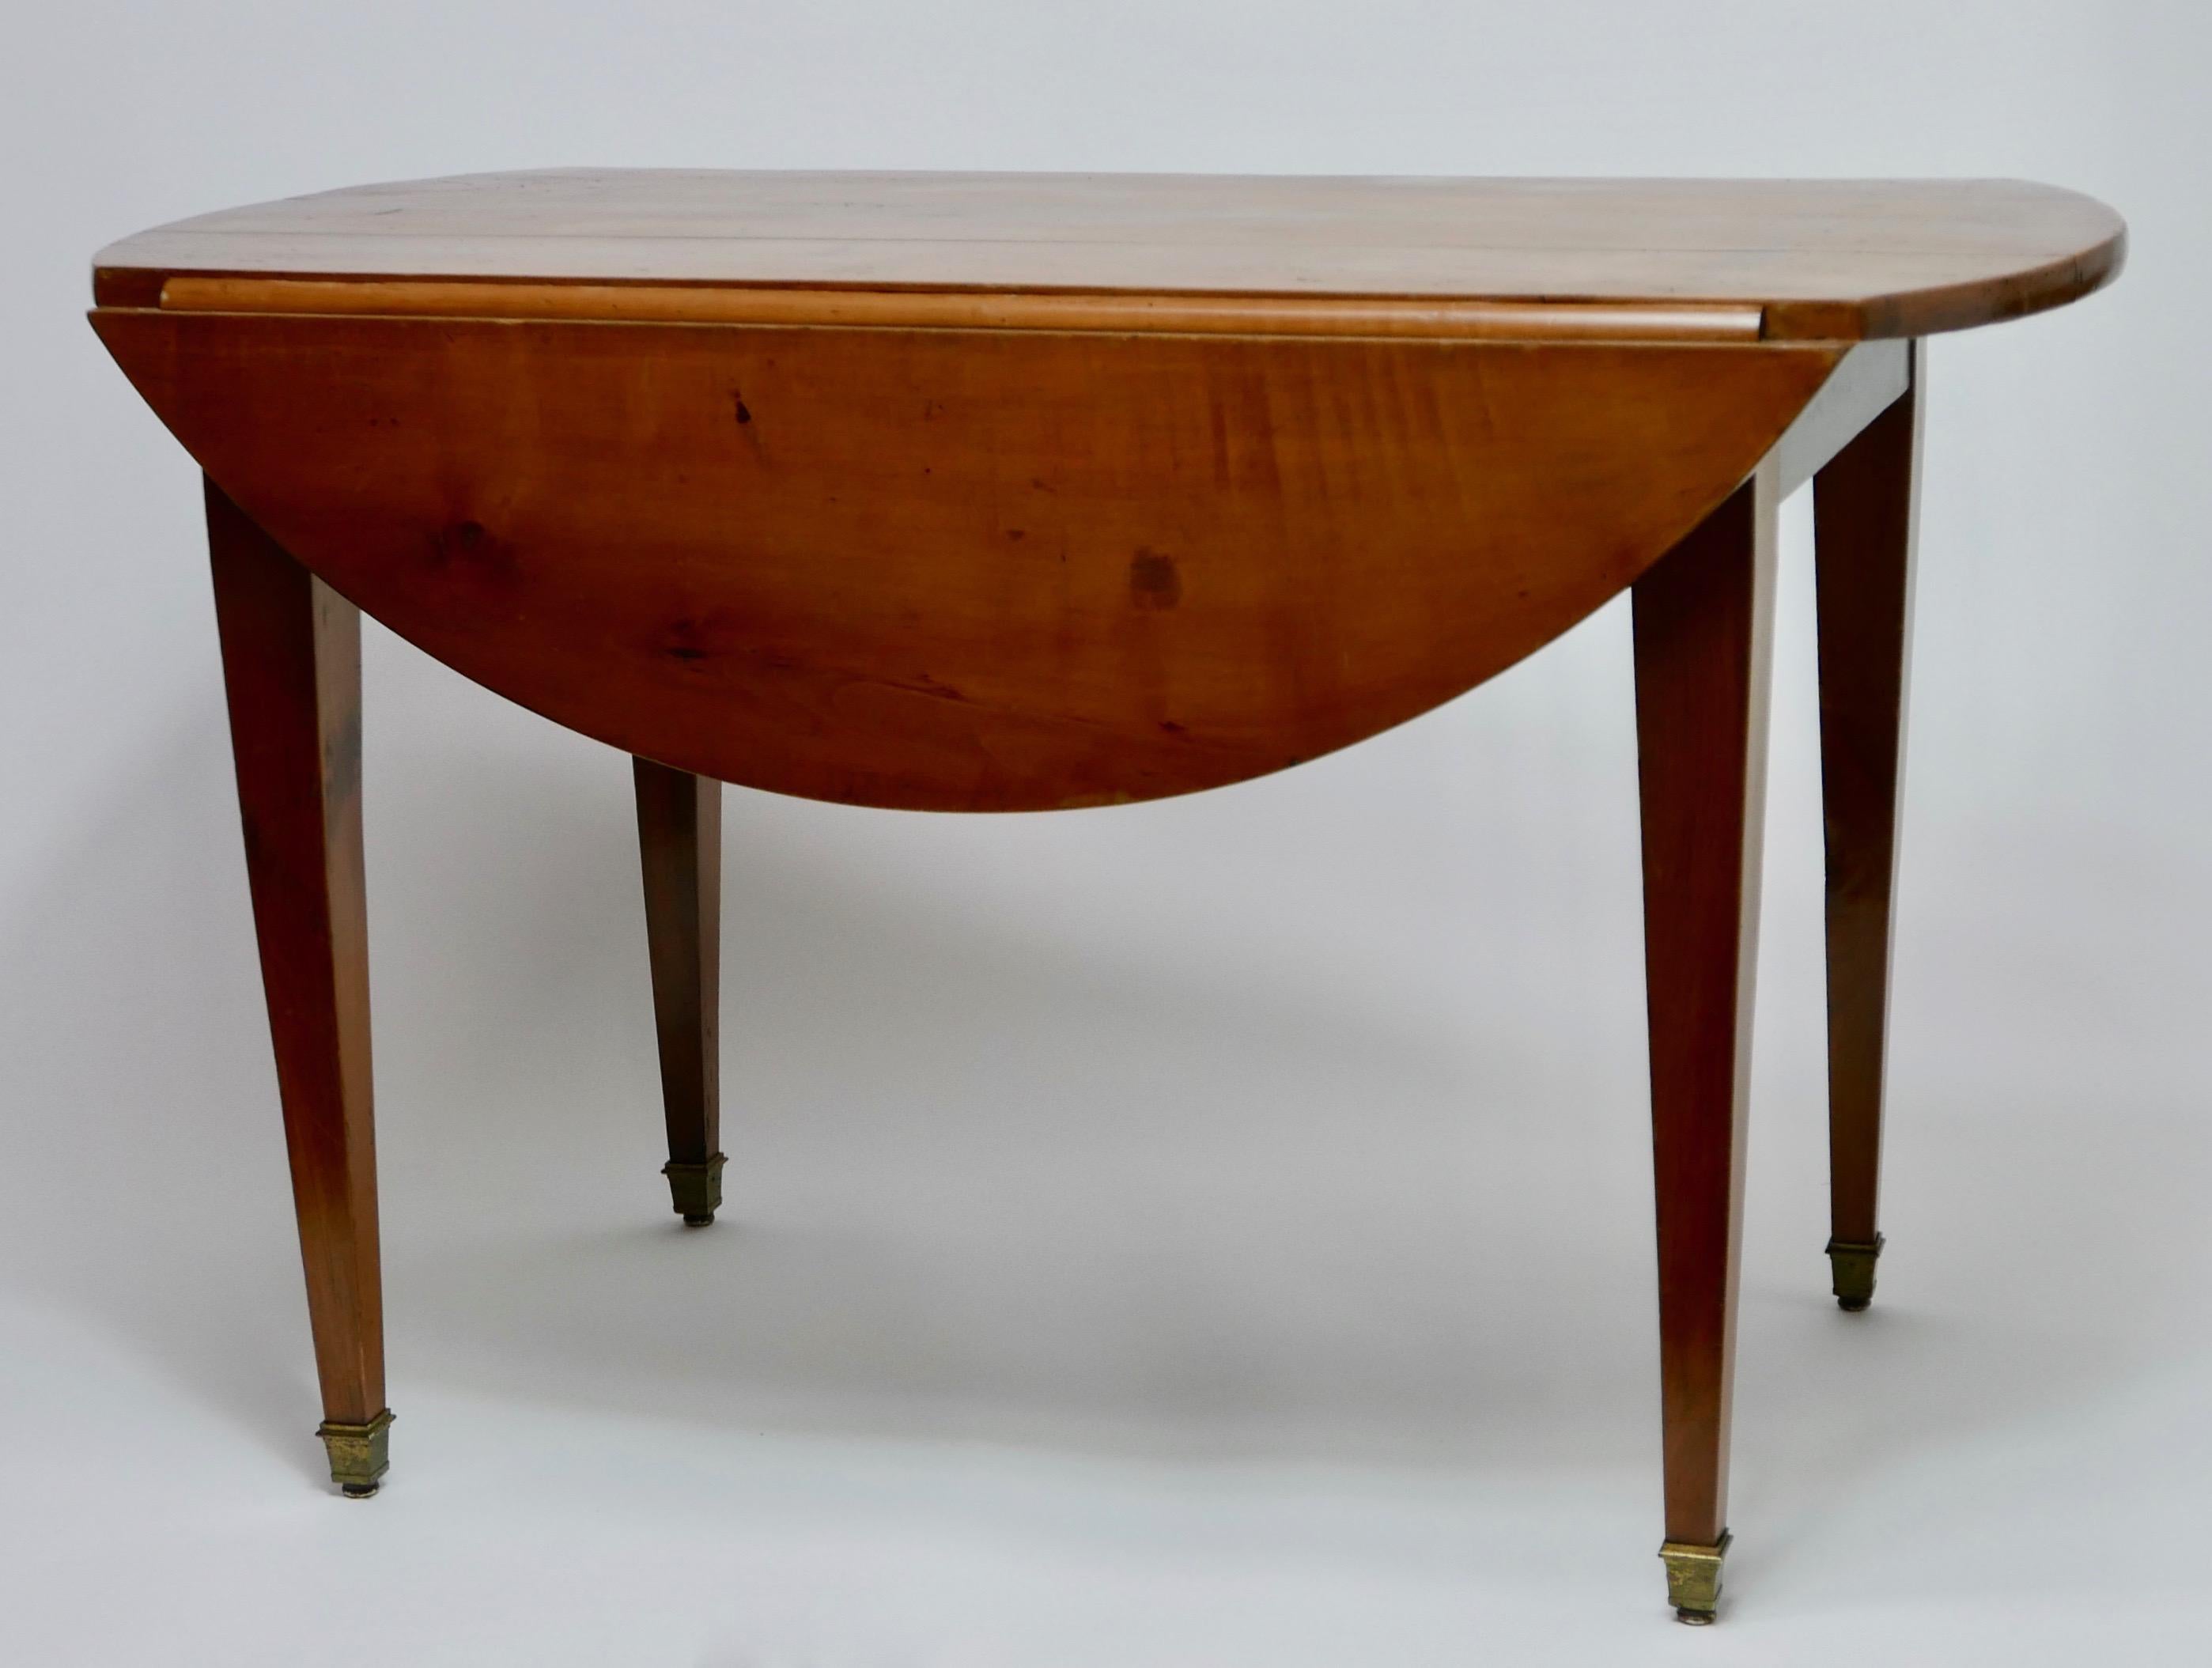 French Cherry Wood Drop-Leaf Table, Early 19th Century 1